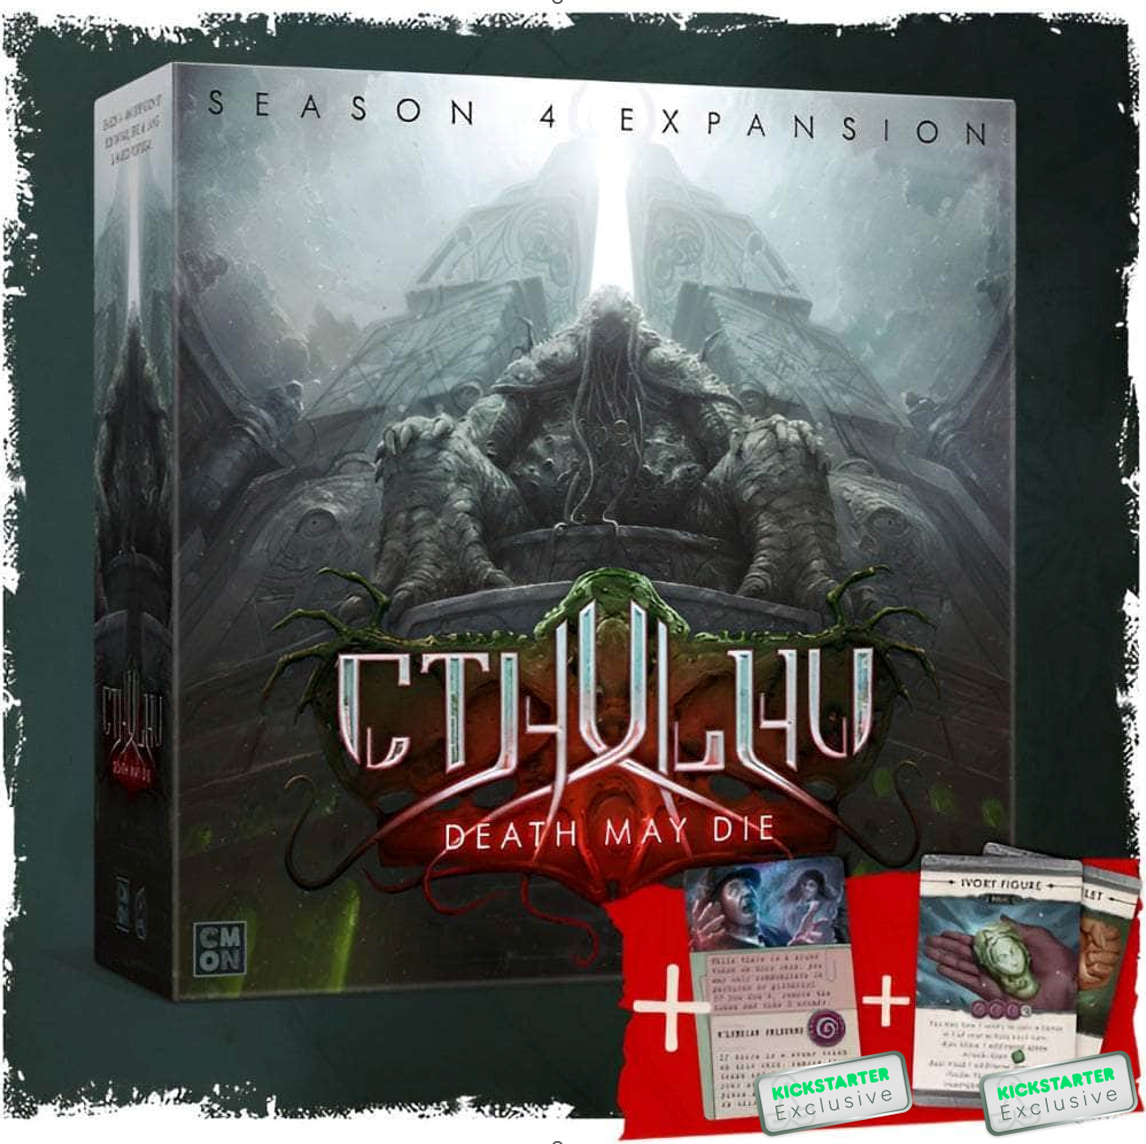 Cthulhu: Death May Die Fear of The Unknown Season 4 Expansion